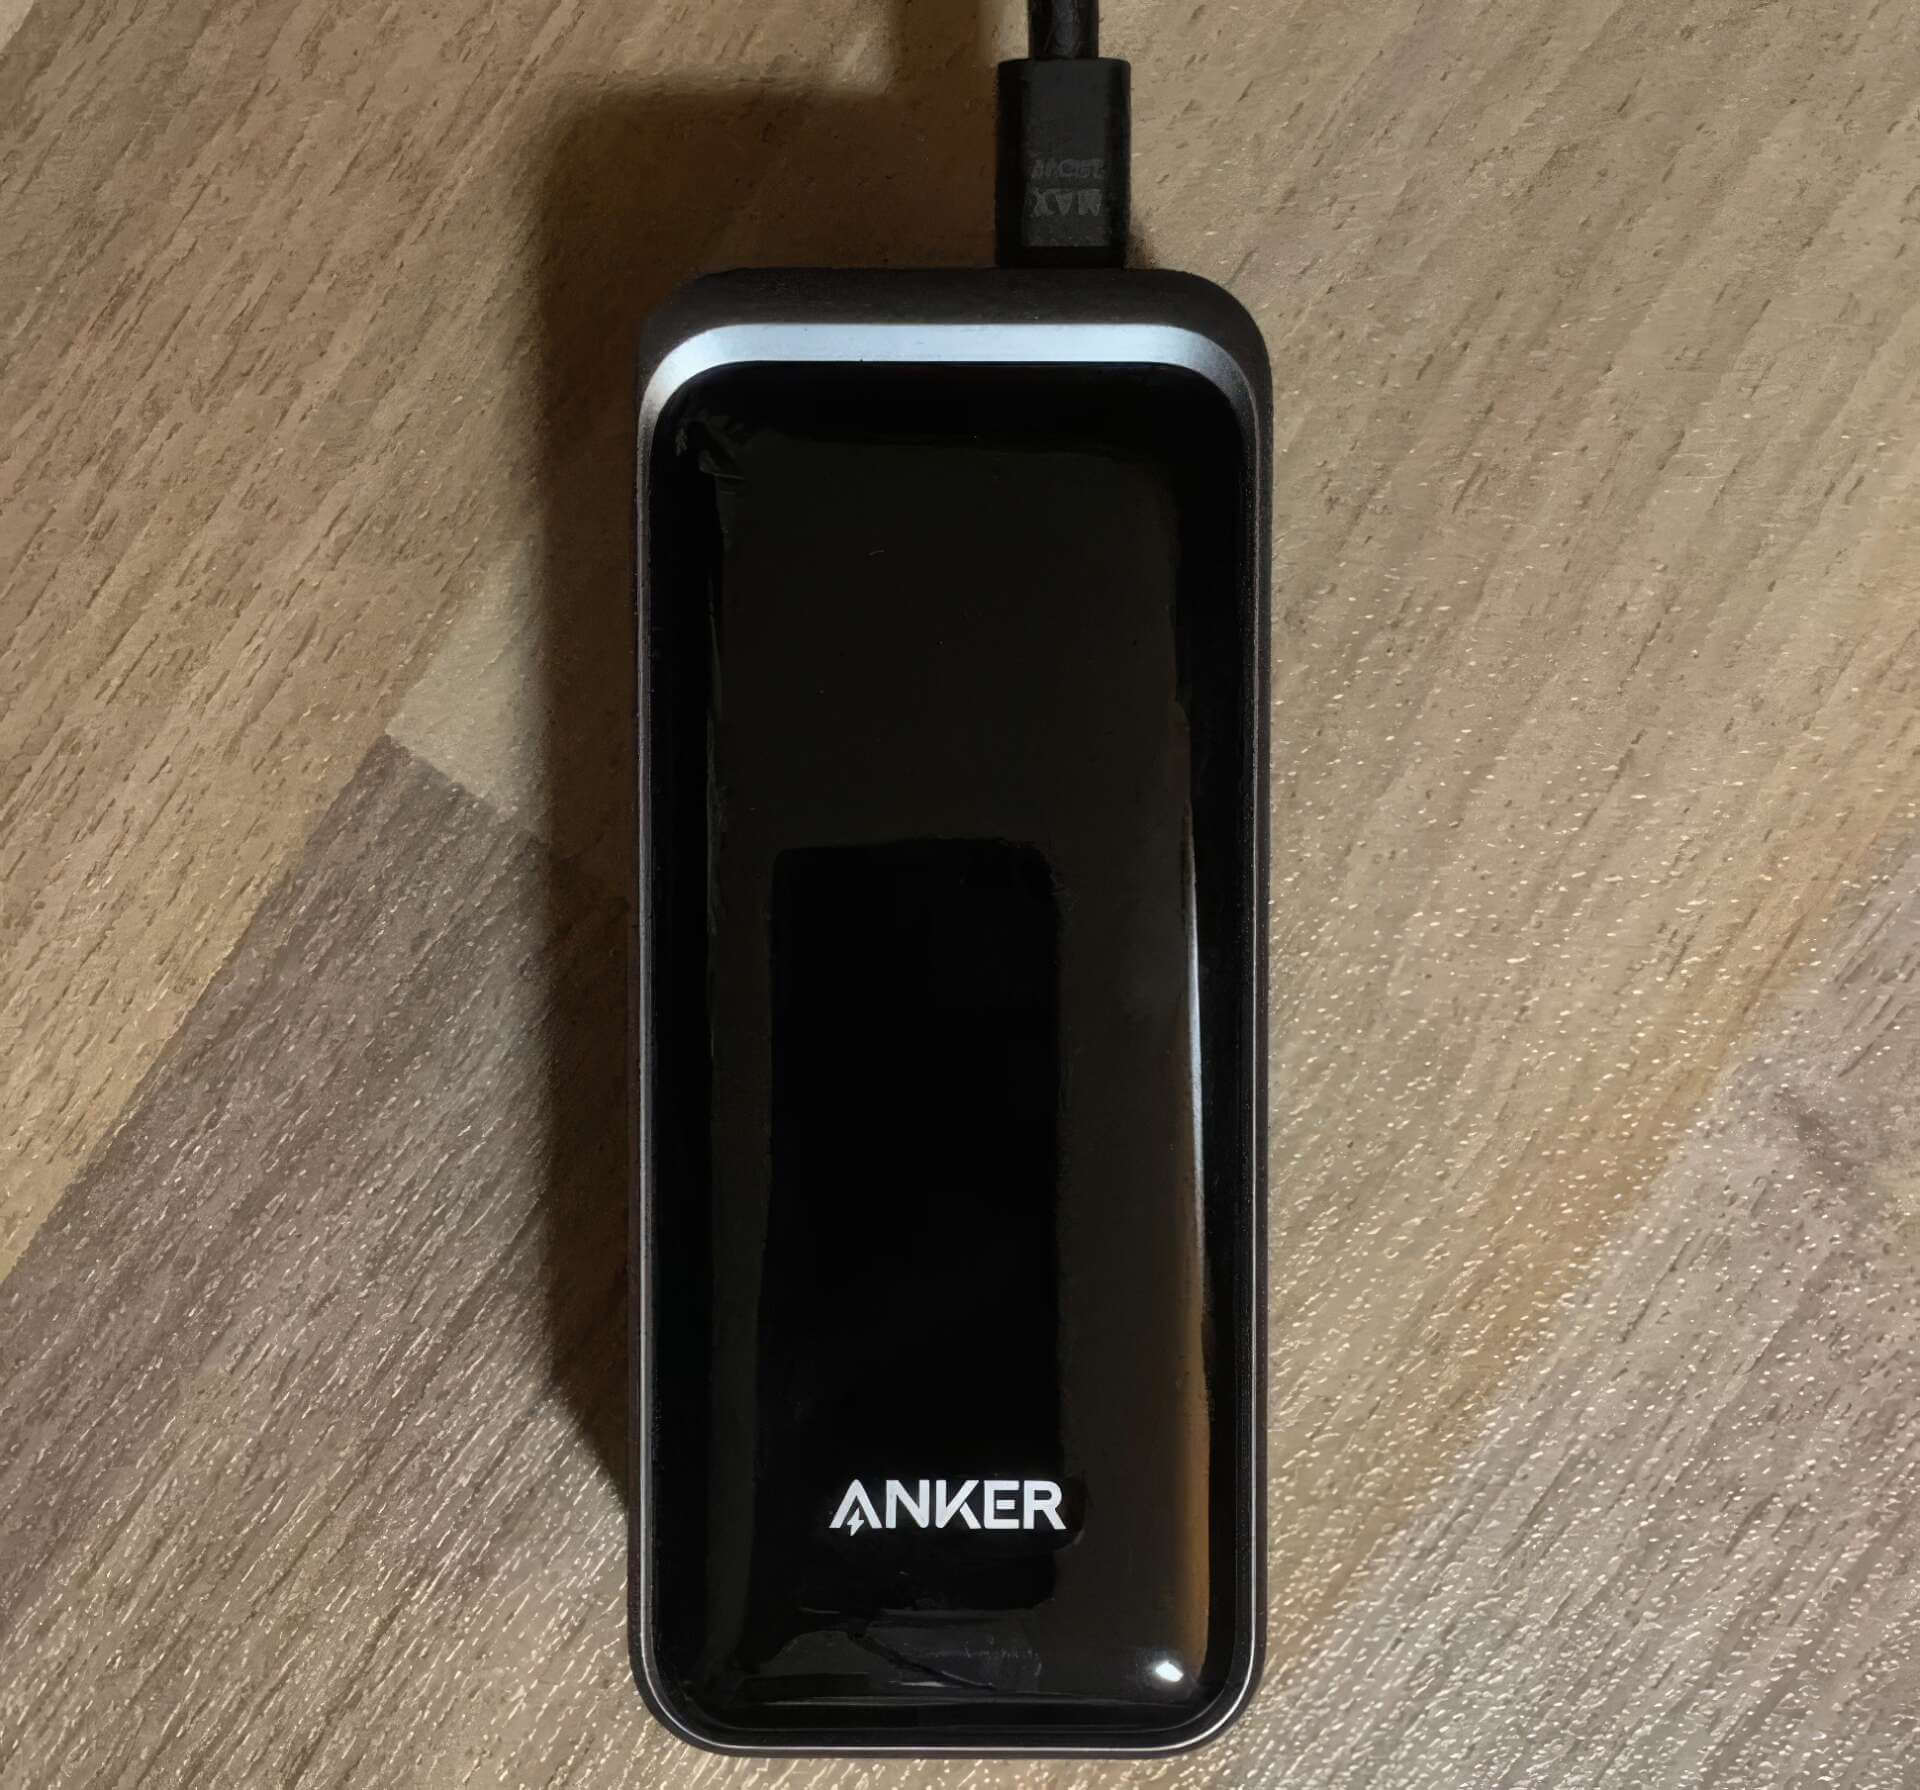 Anker Prime Power Bank On Table